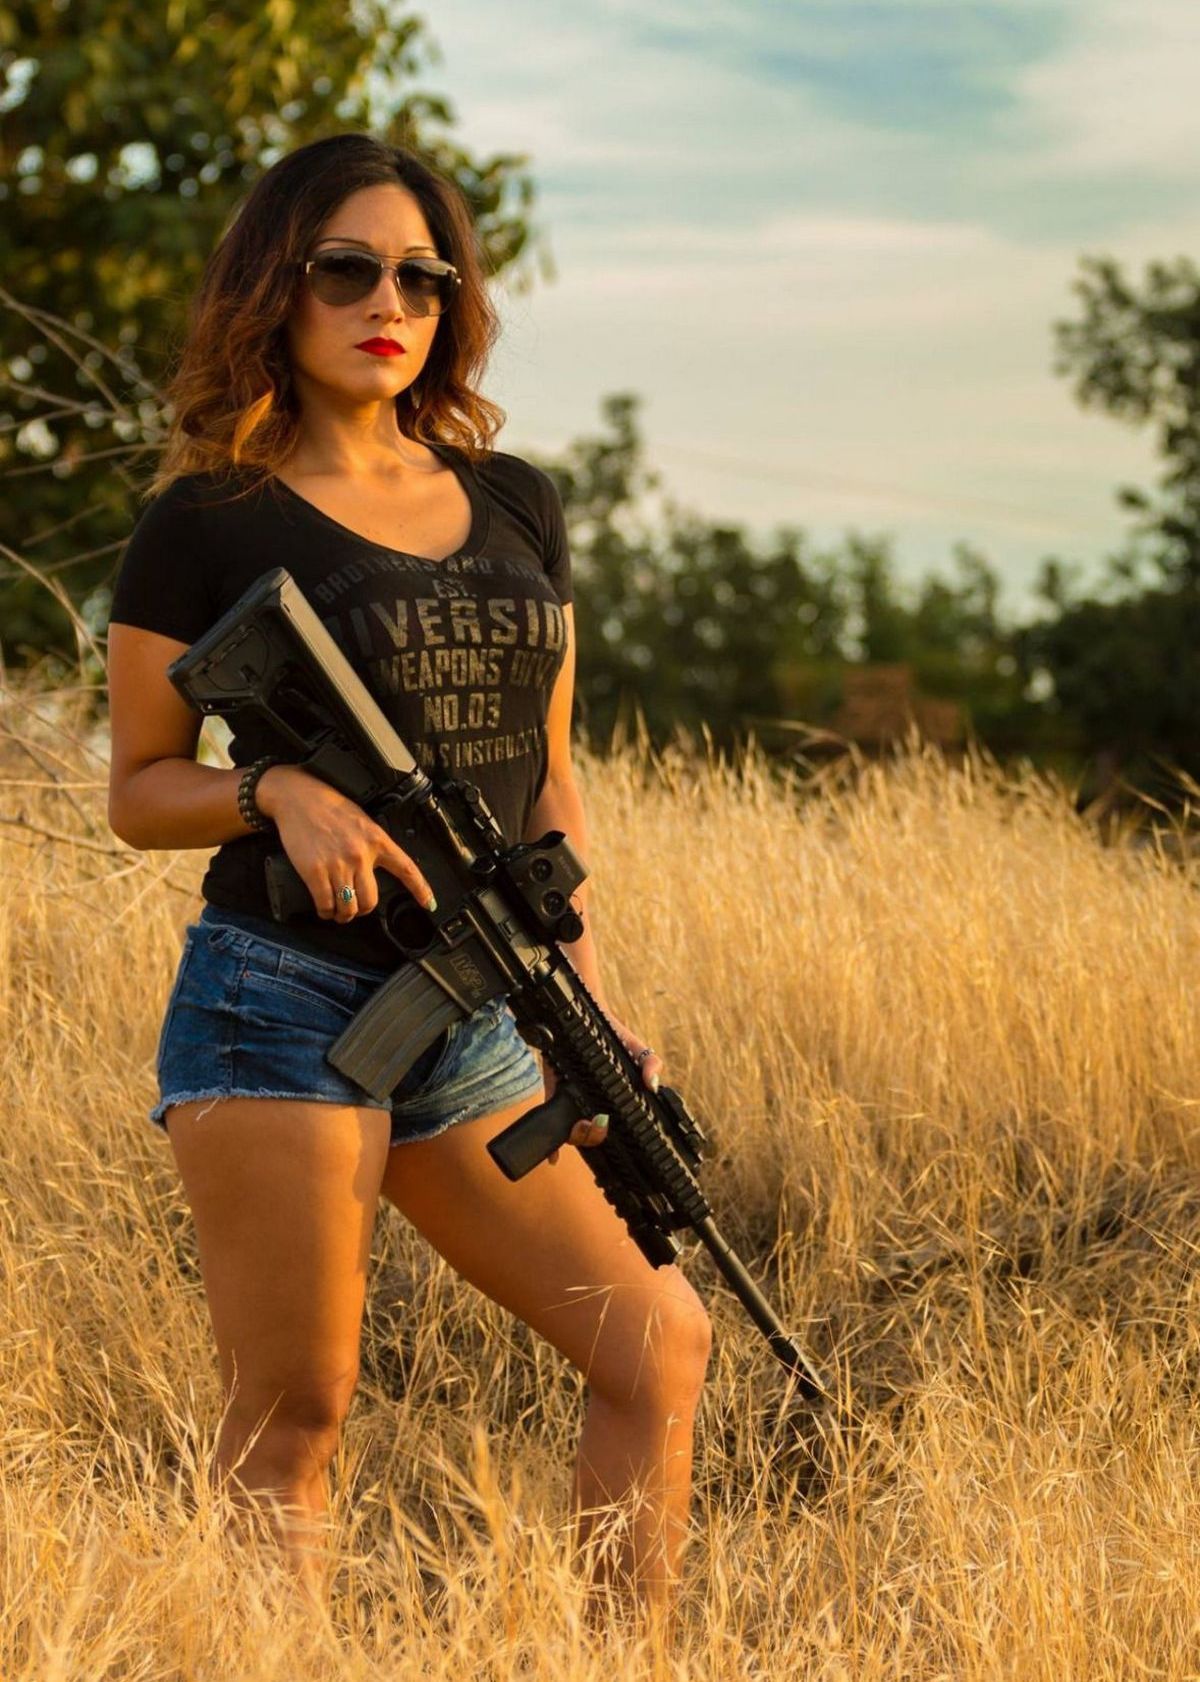 WOMEN WITH WEAPONS...9 84lFpvWJ_o